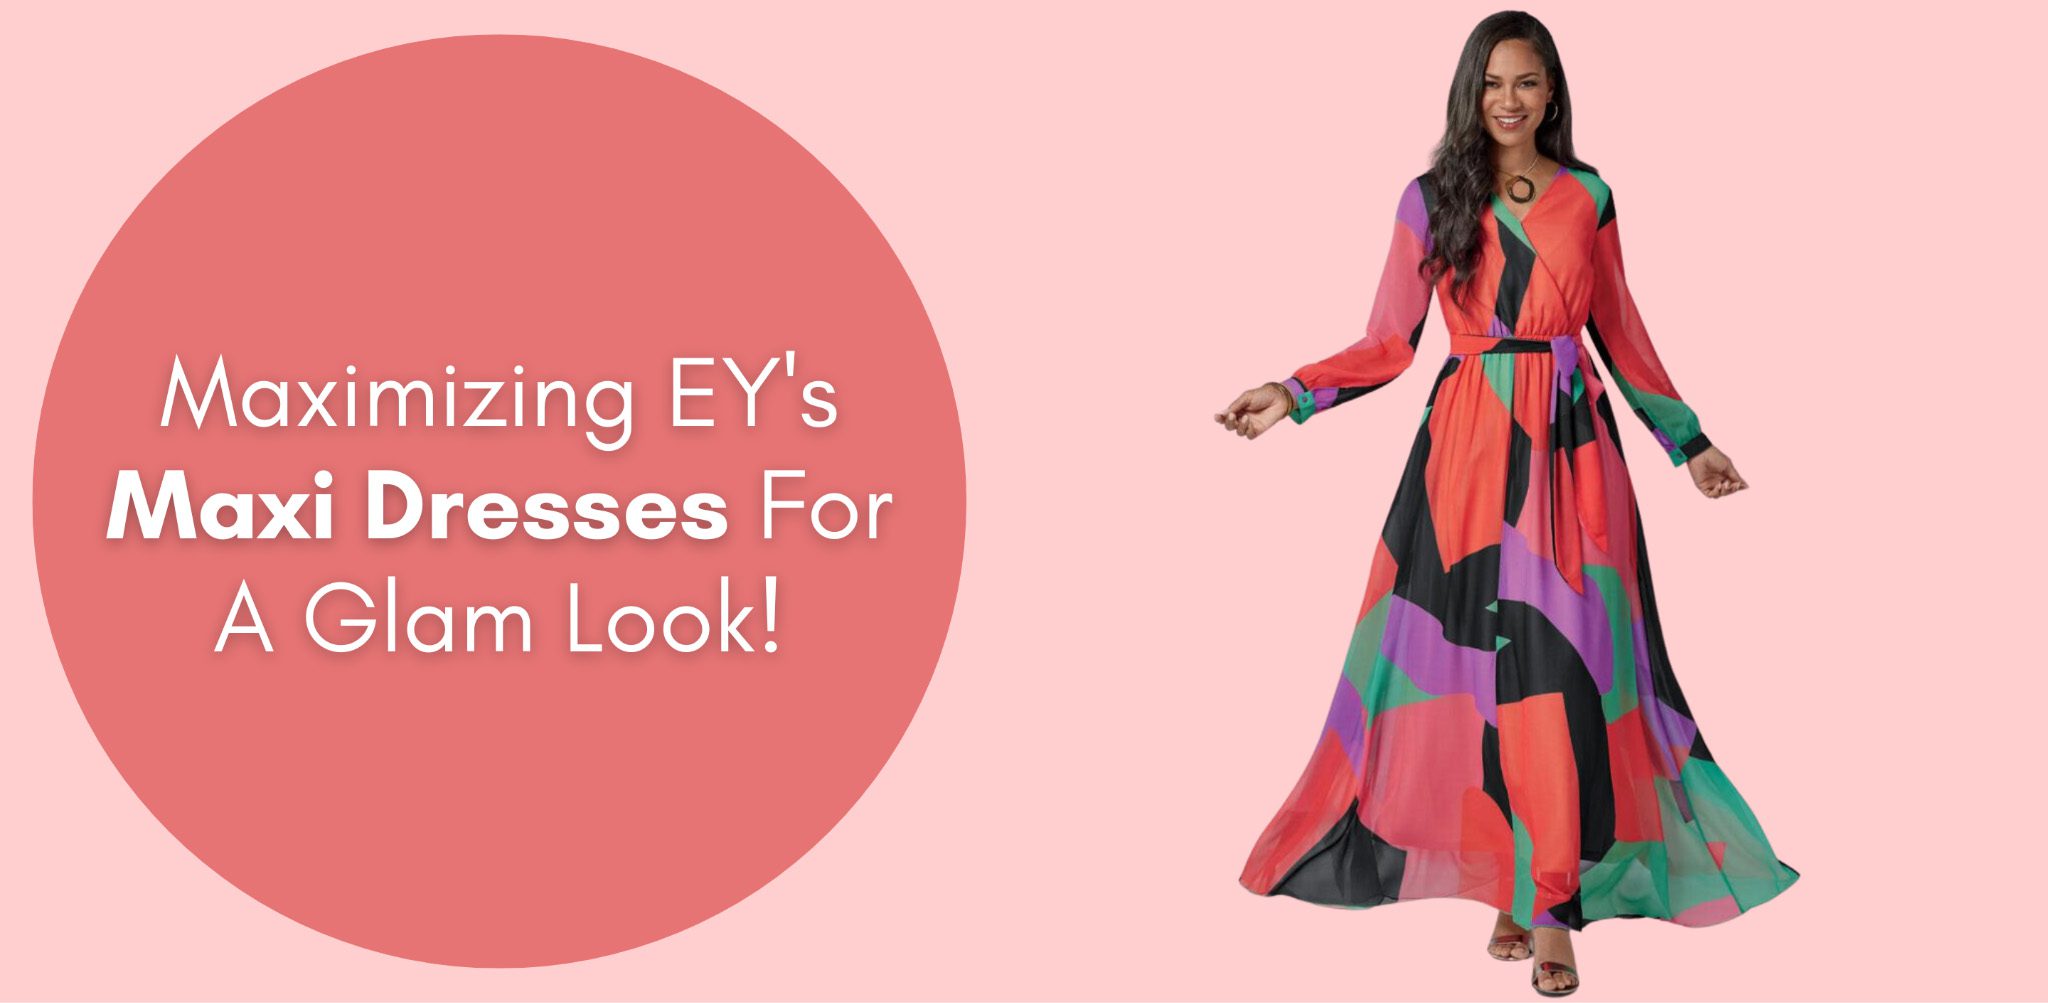 Maximizing EY’s Maxi Dresses For A Glam Look!